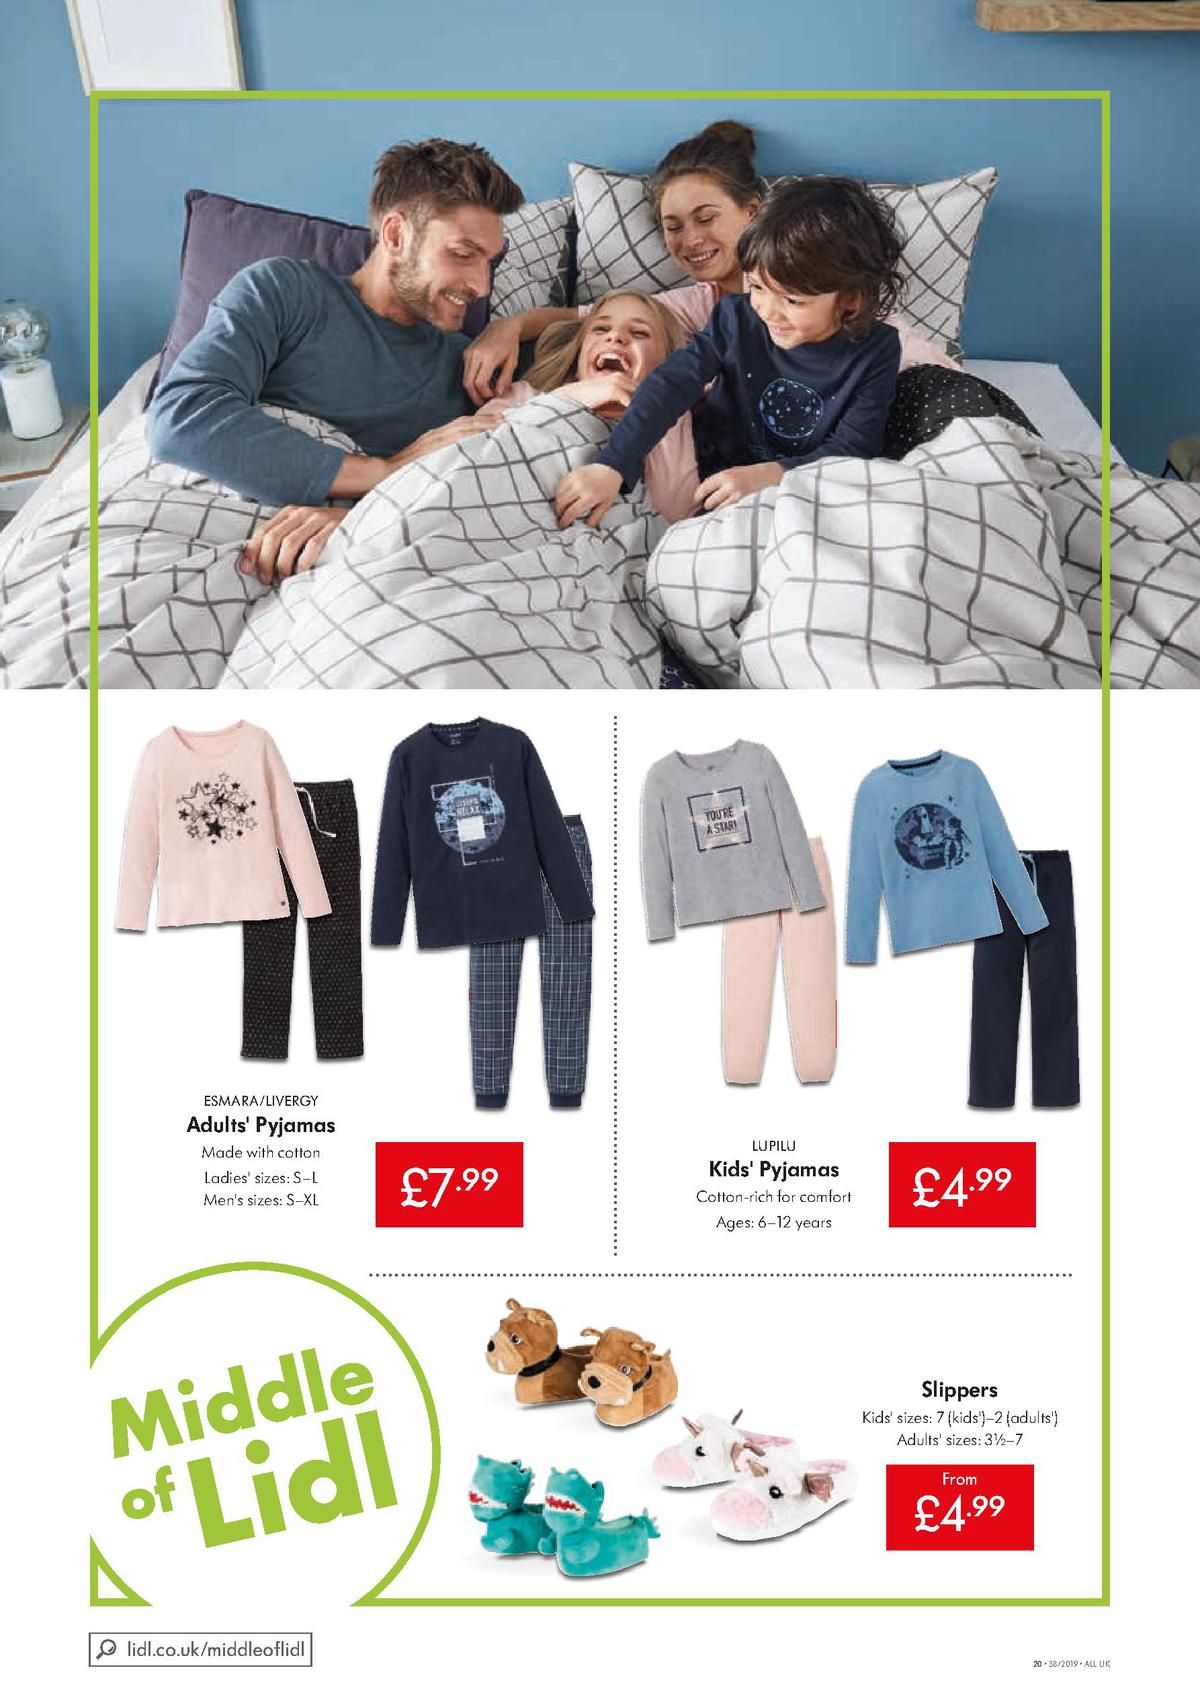 LIDL Offers from 19 September